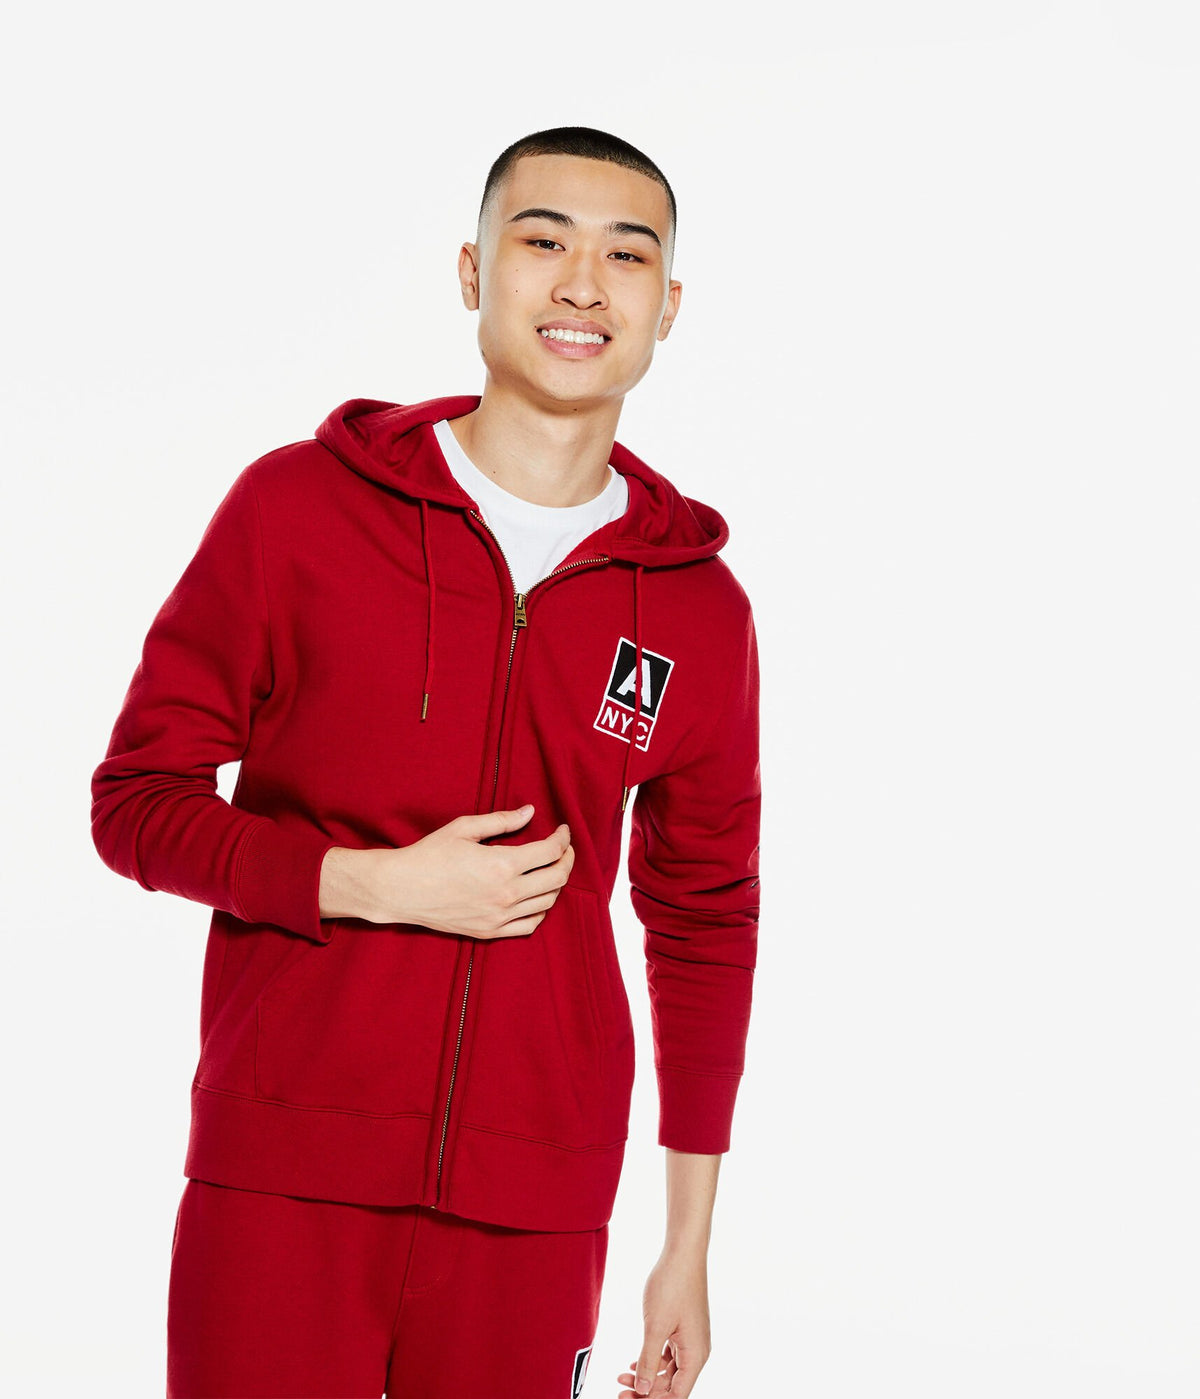 Aeropostale Mens' Aeropostale NYC Heritage Full-Zip Hoodie - Red - Size XL - Cotton - Teen Fashion & Clothing Cerise Red